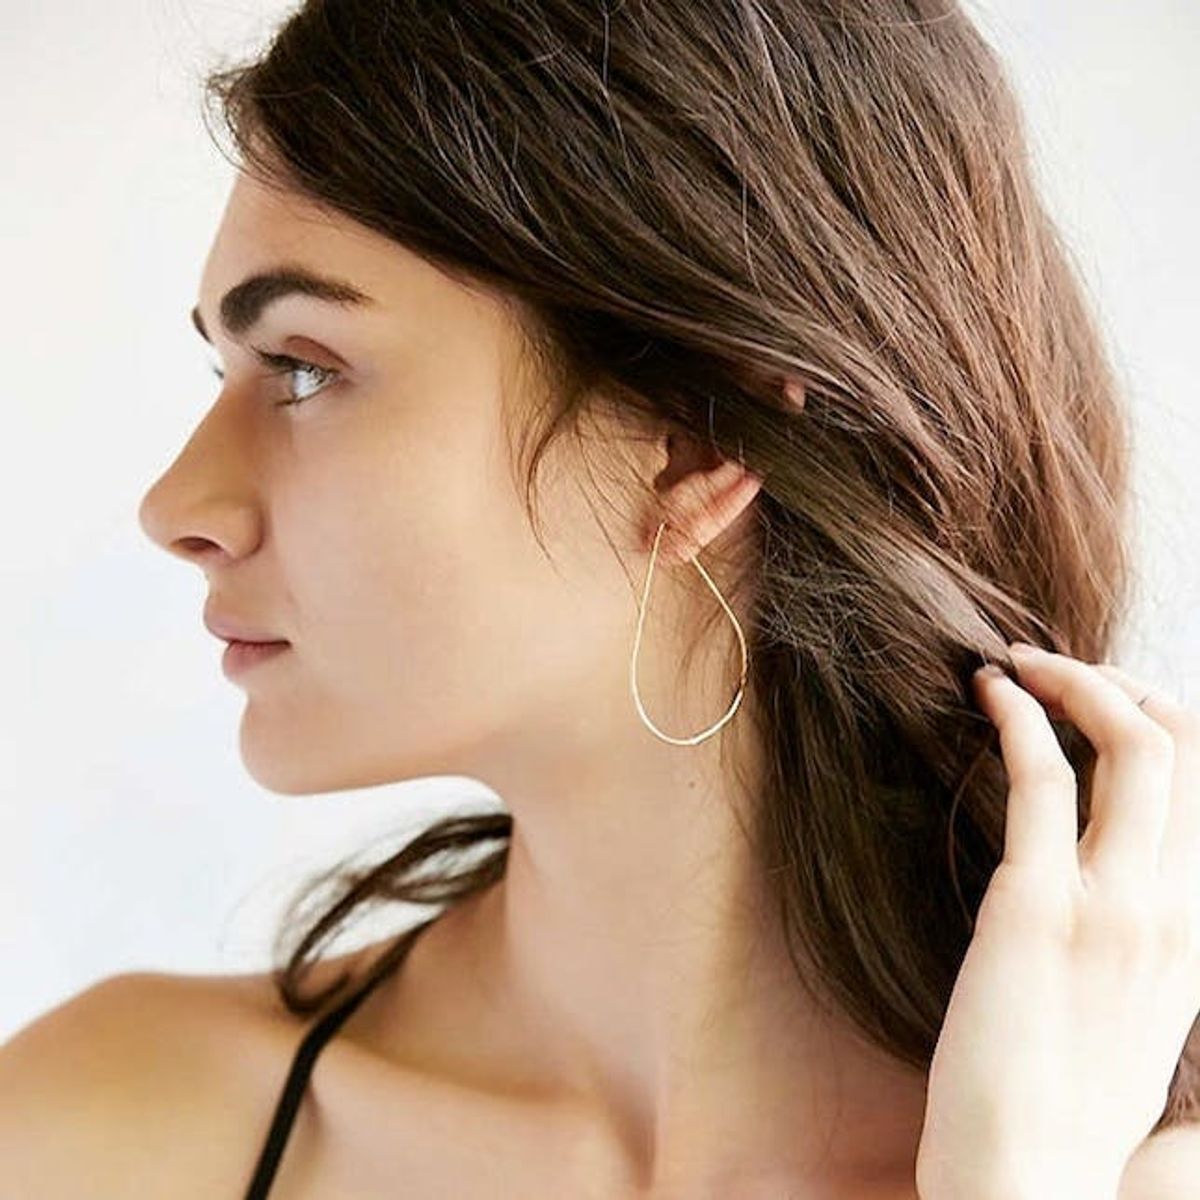 Hoop Earrings Are Back, and These 16 Pairs Are Our Faves